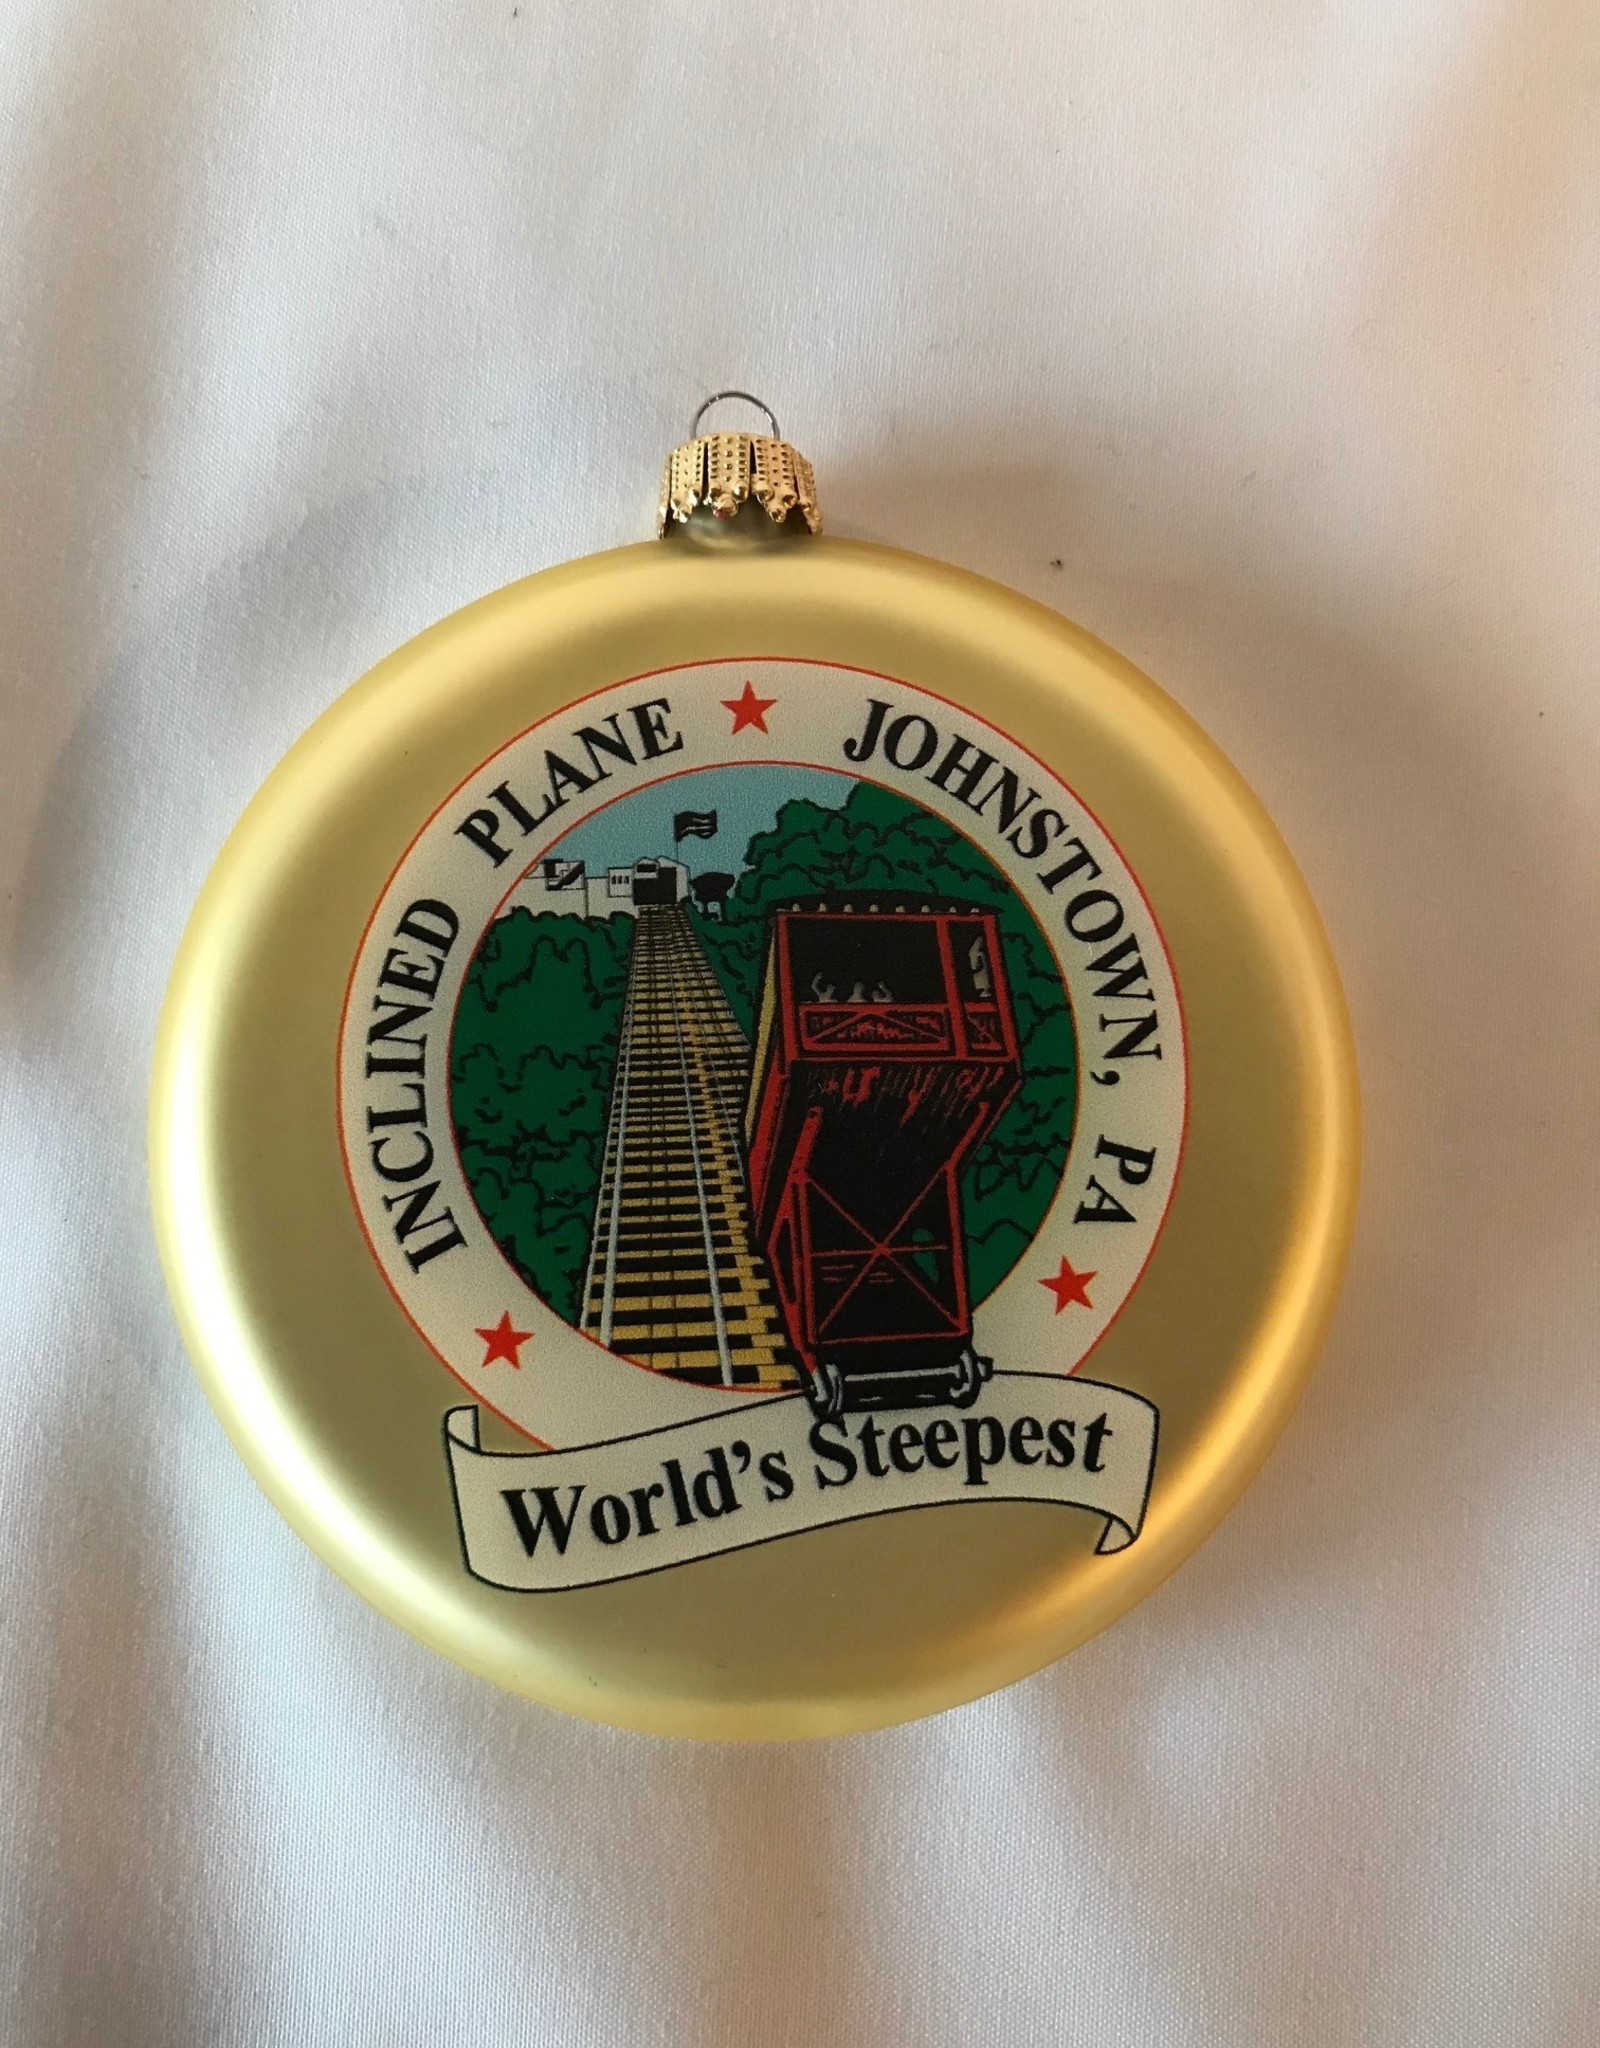 Flat Round Glass Gold Ornament w/ Inclined Plane Logo